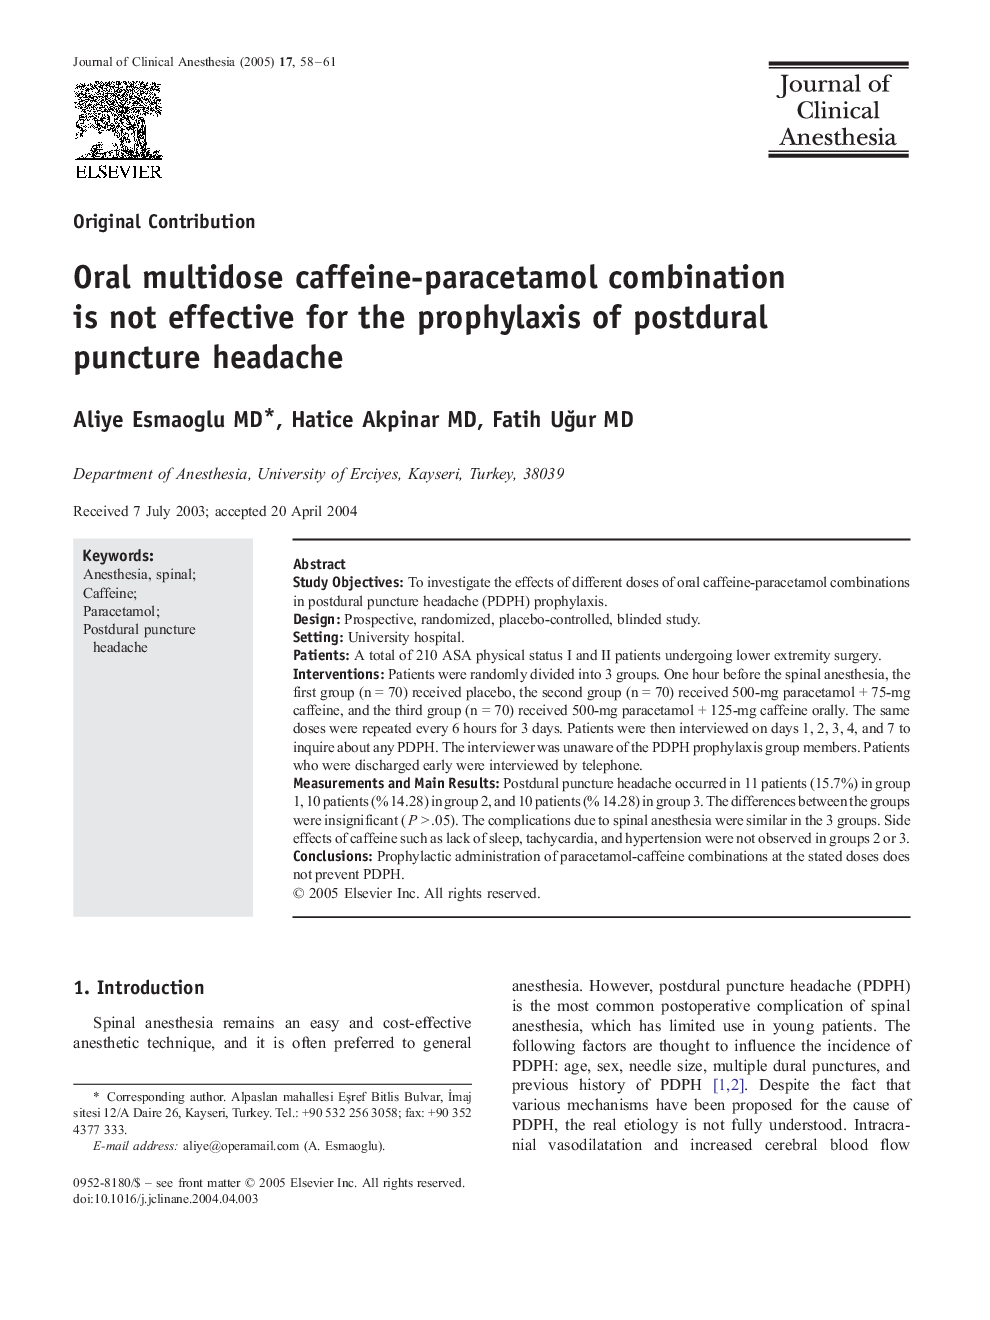 Oral multidose caffeine-paracetamol combination is not effective for the prophylaxis of postdural puncture headache